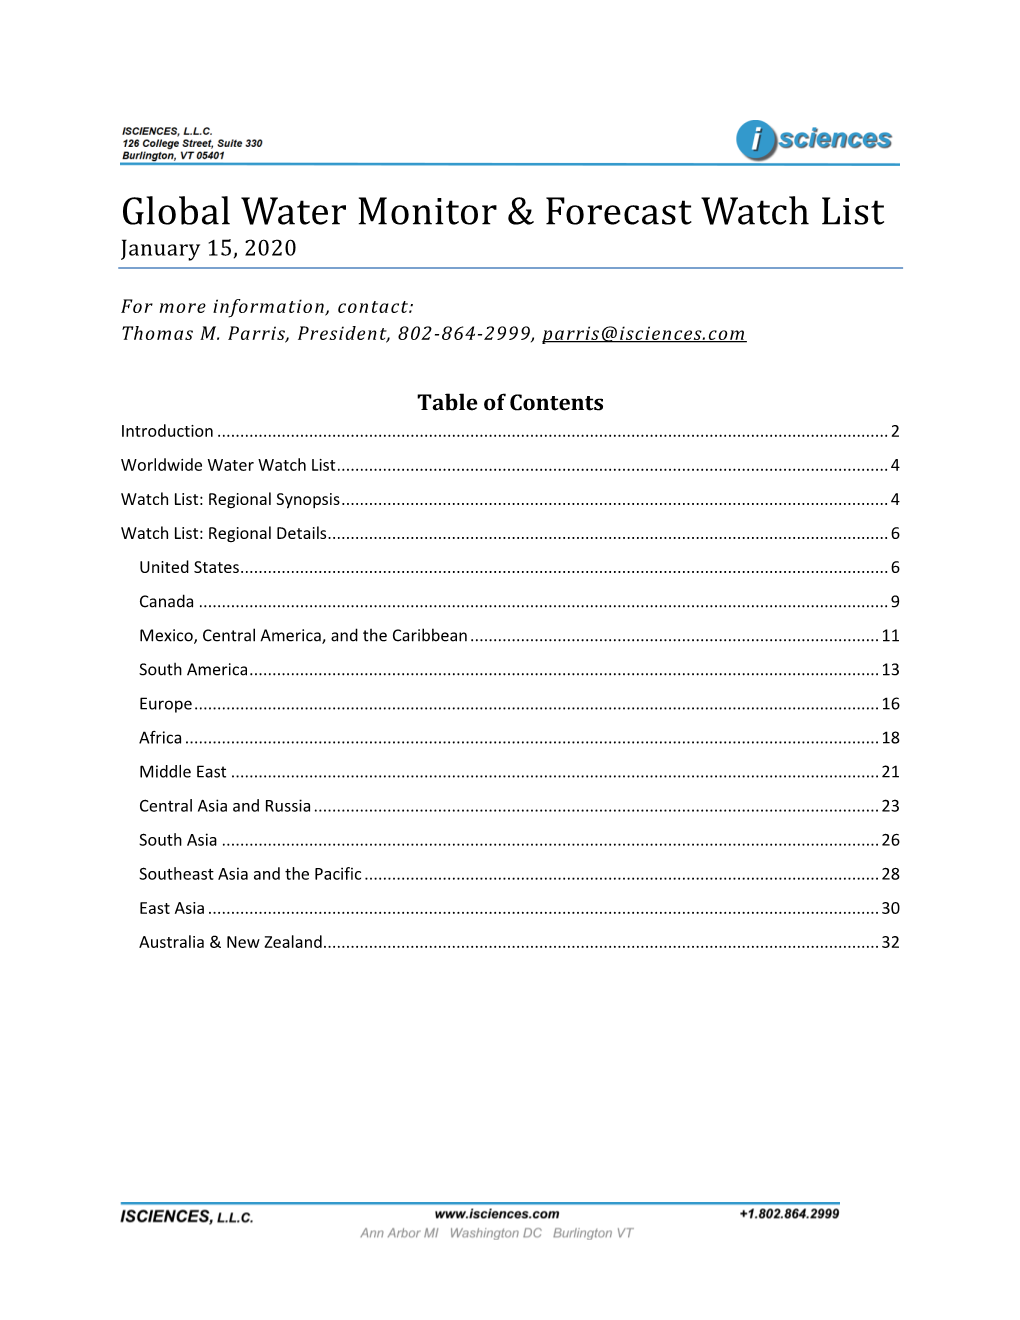 Global Water Monitor & Forecast Watch List